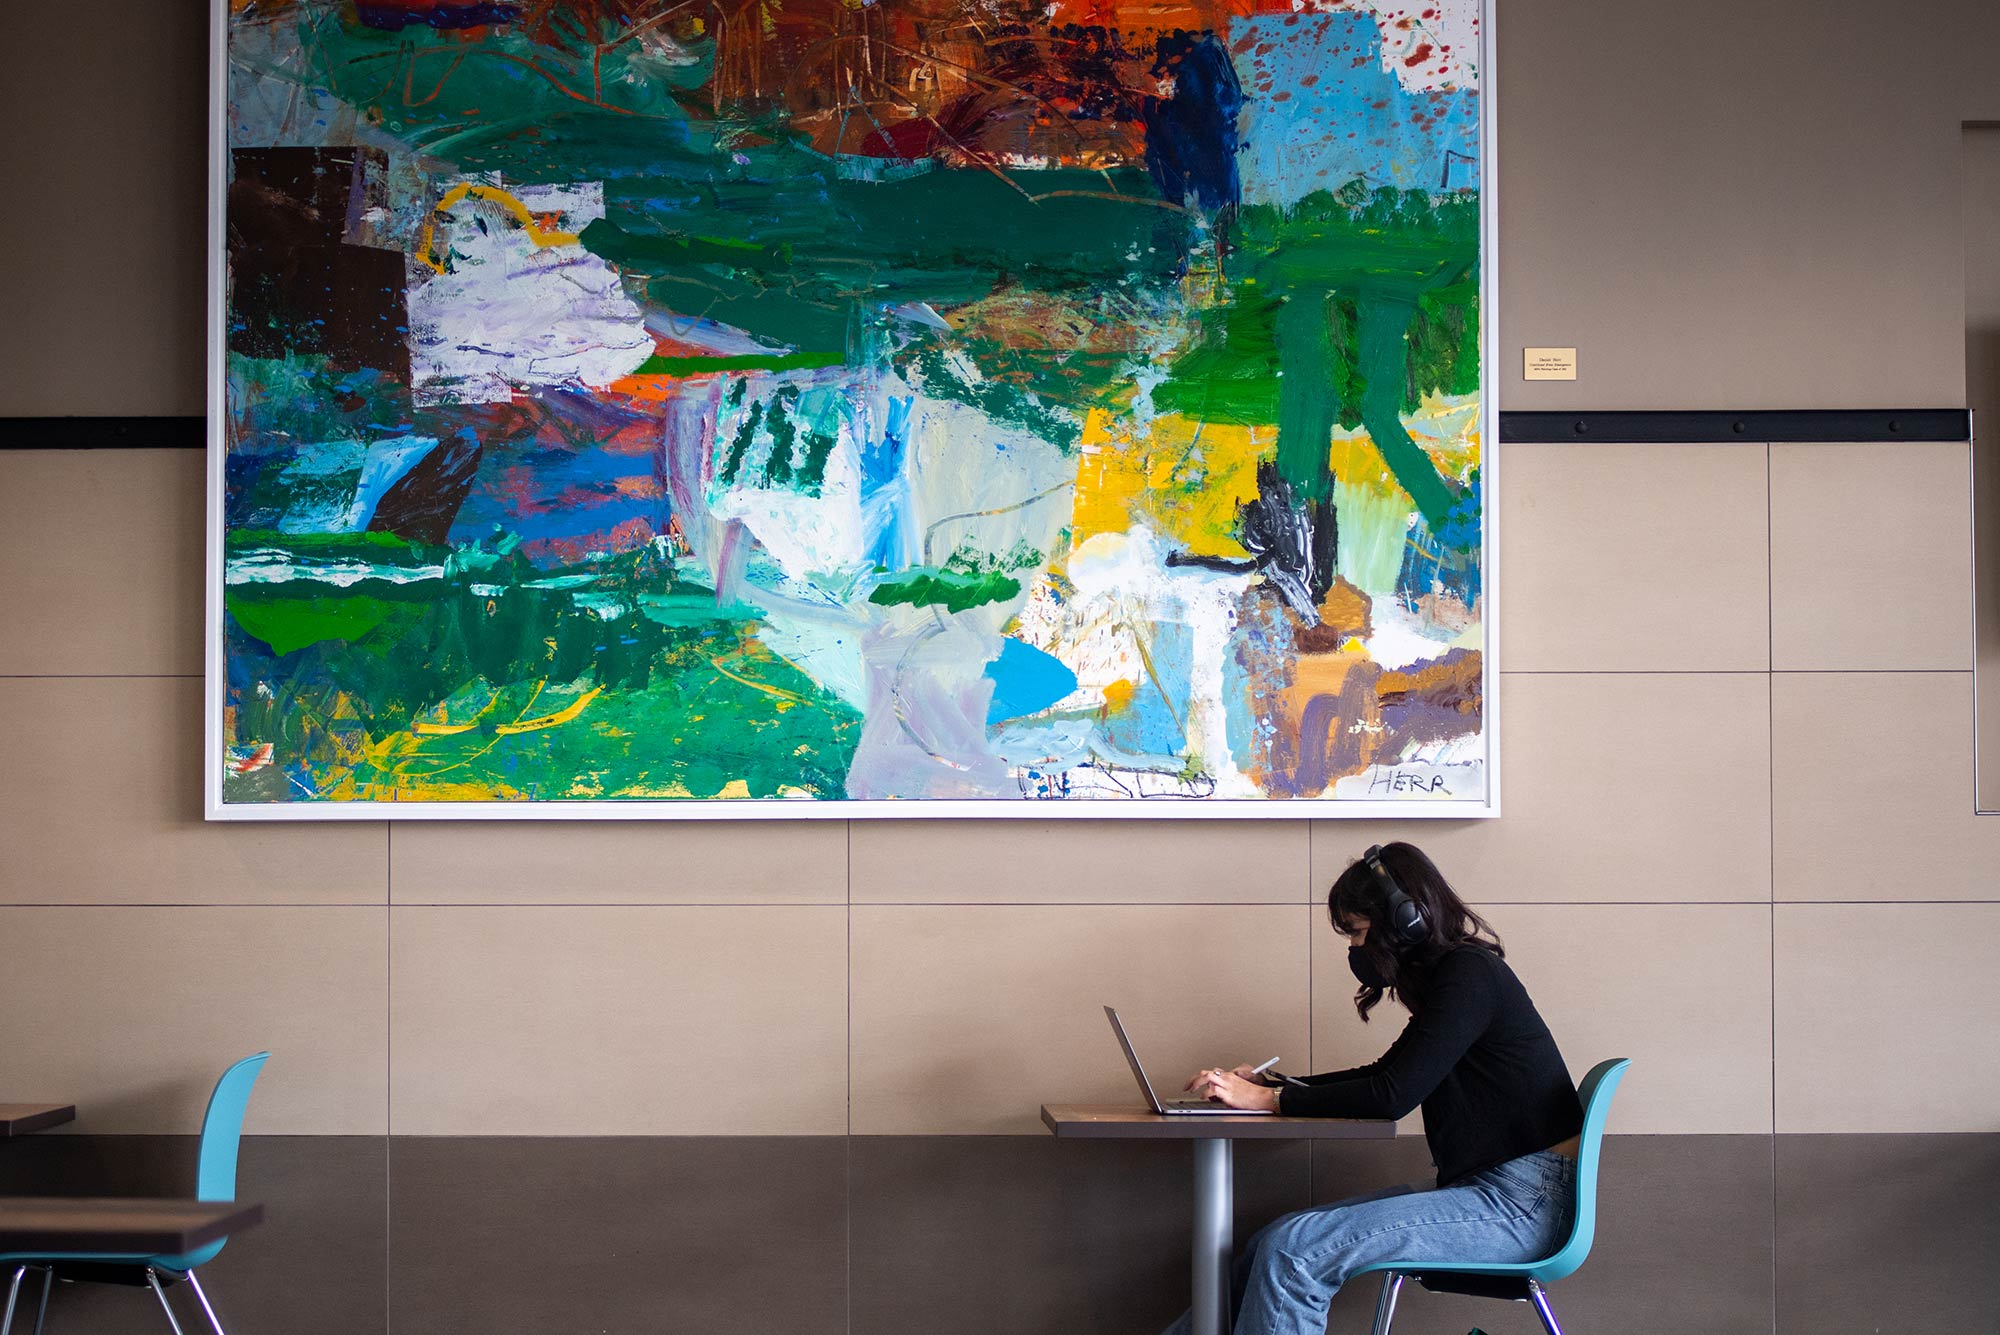 Photo of a student in a black shirt in jeans sitting alone at a table with a face mask on as they attend virtual class. A large abstract painting hangs on the wall behind them.